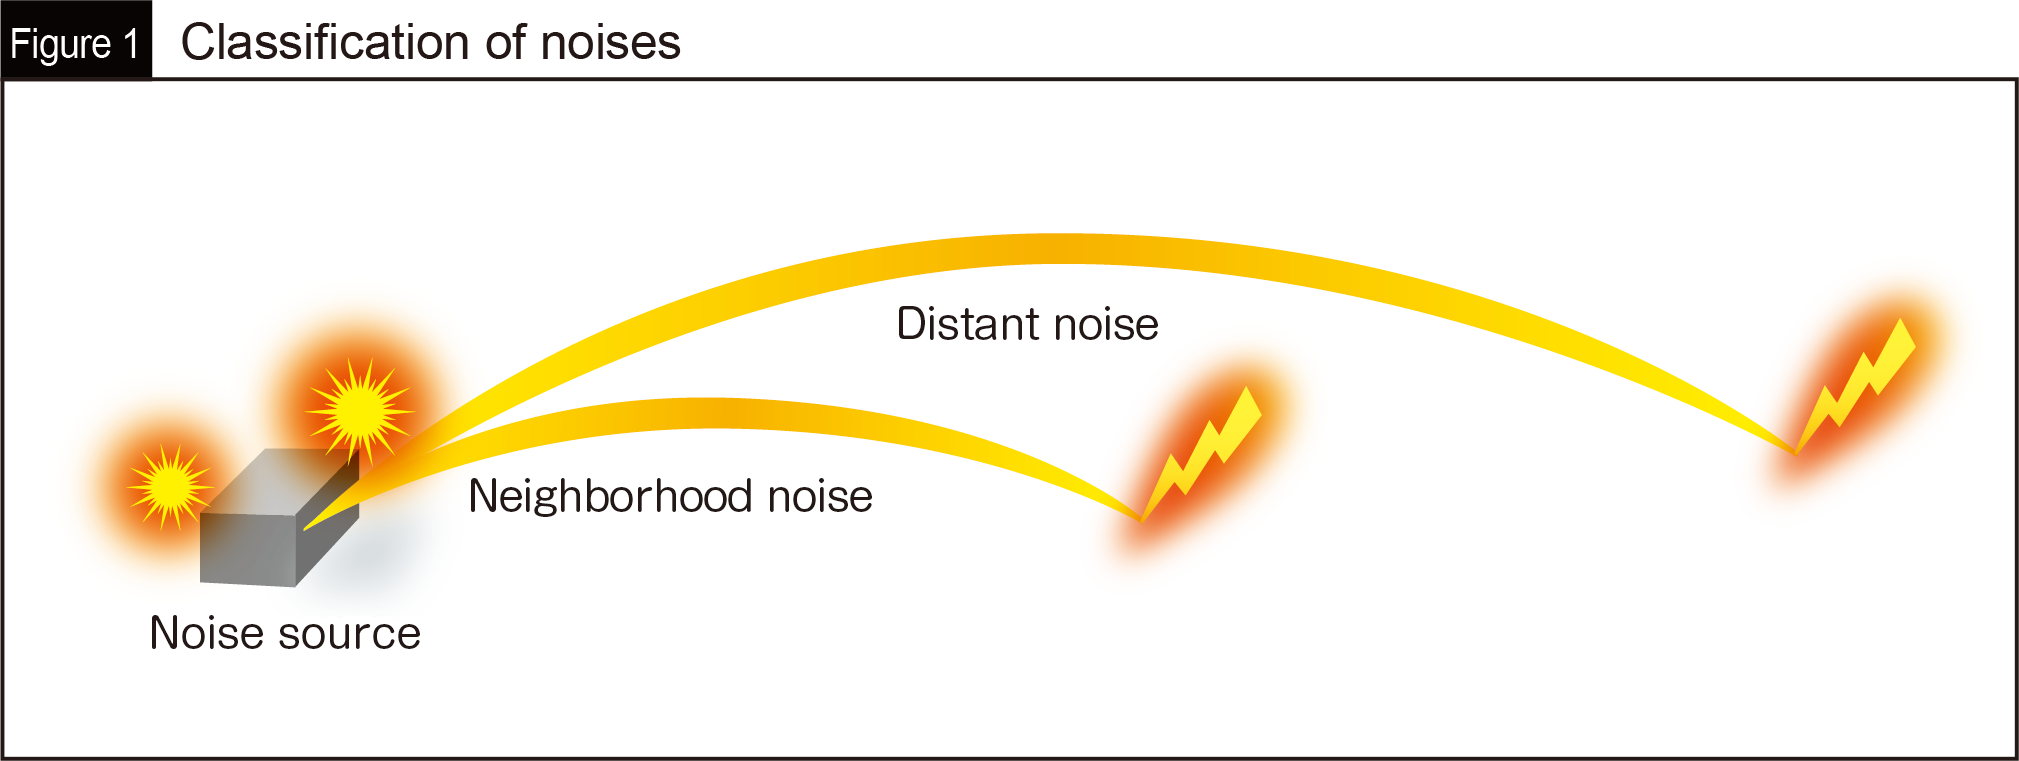 Fig. 1 Classification of noises